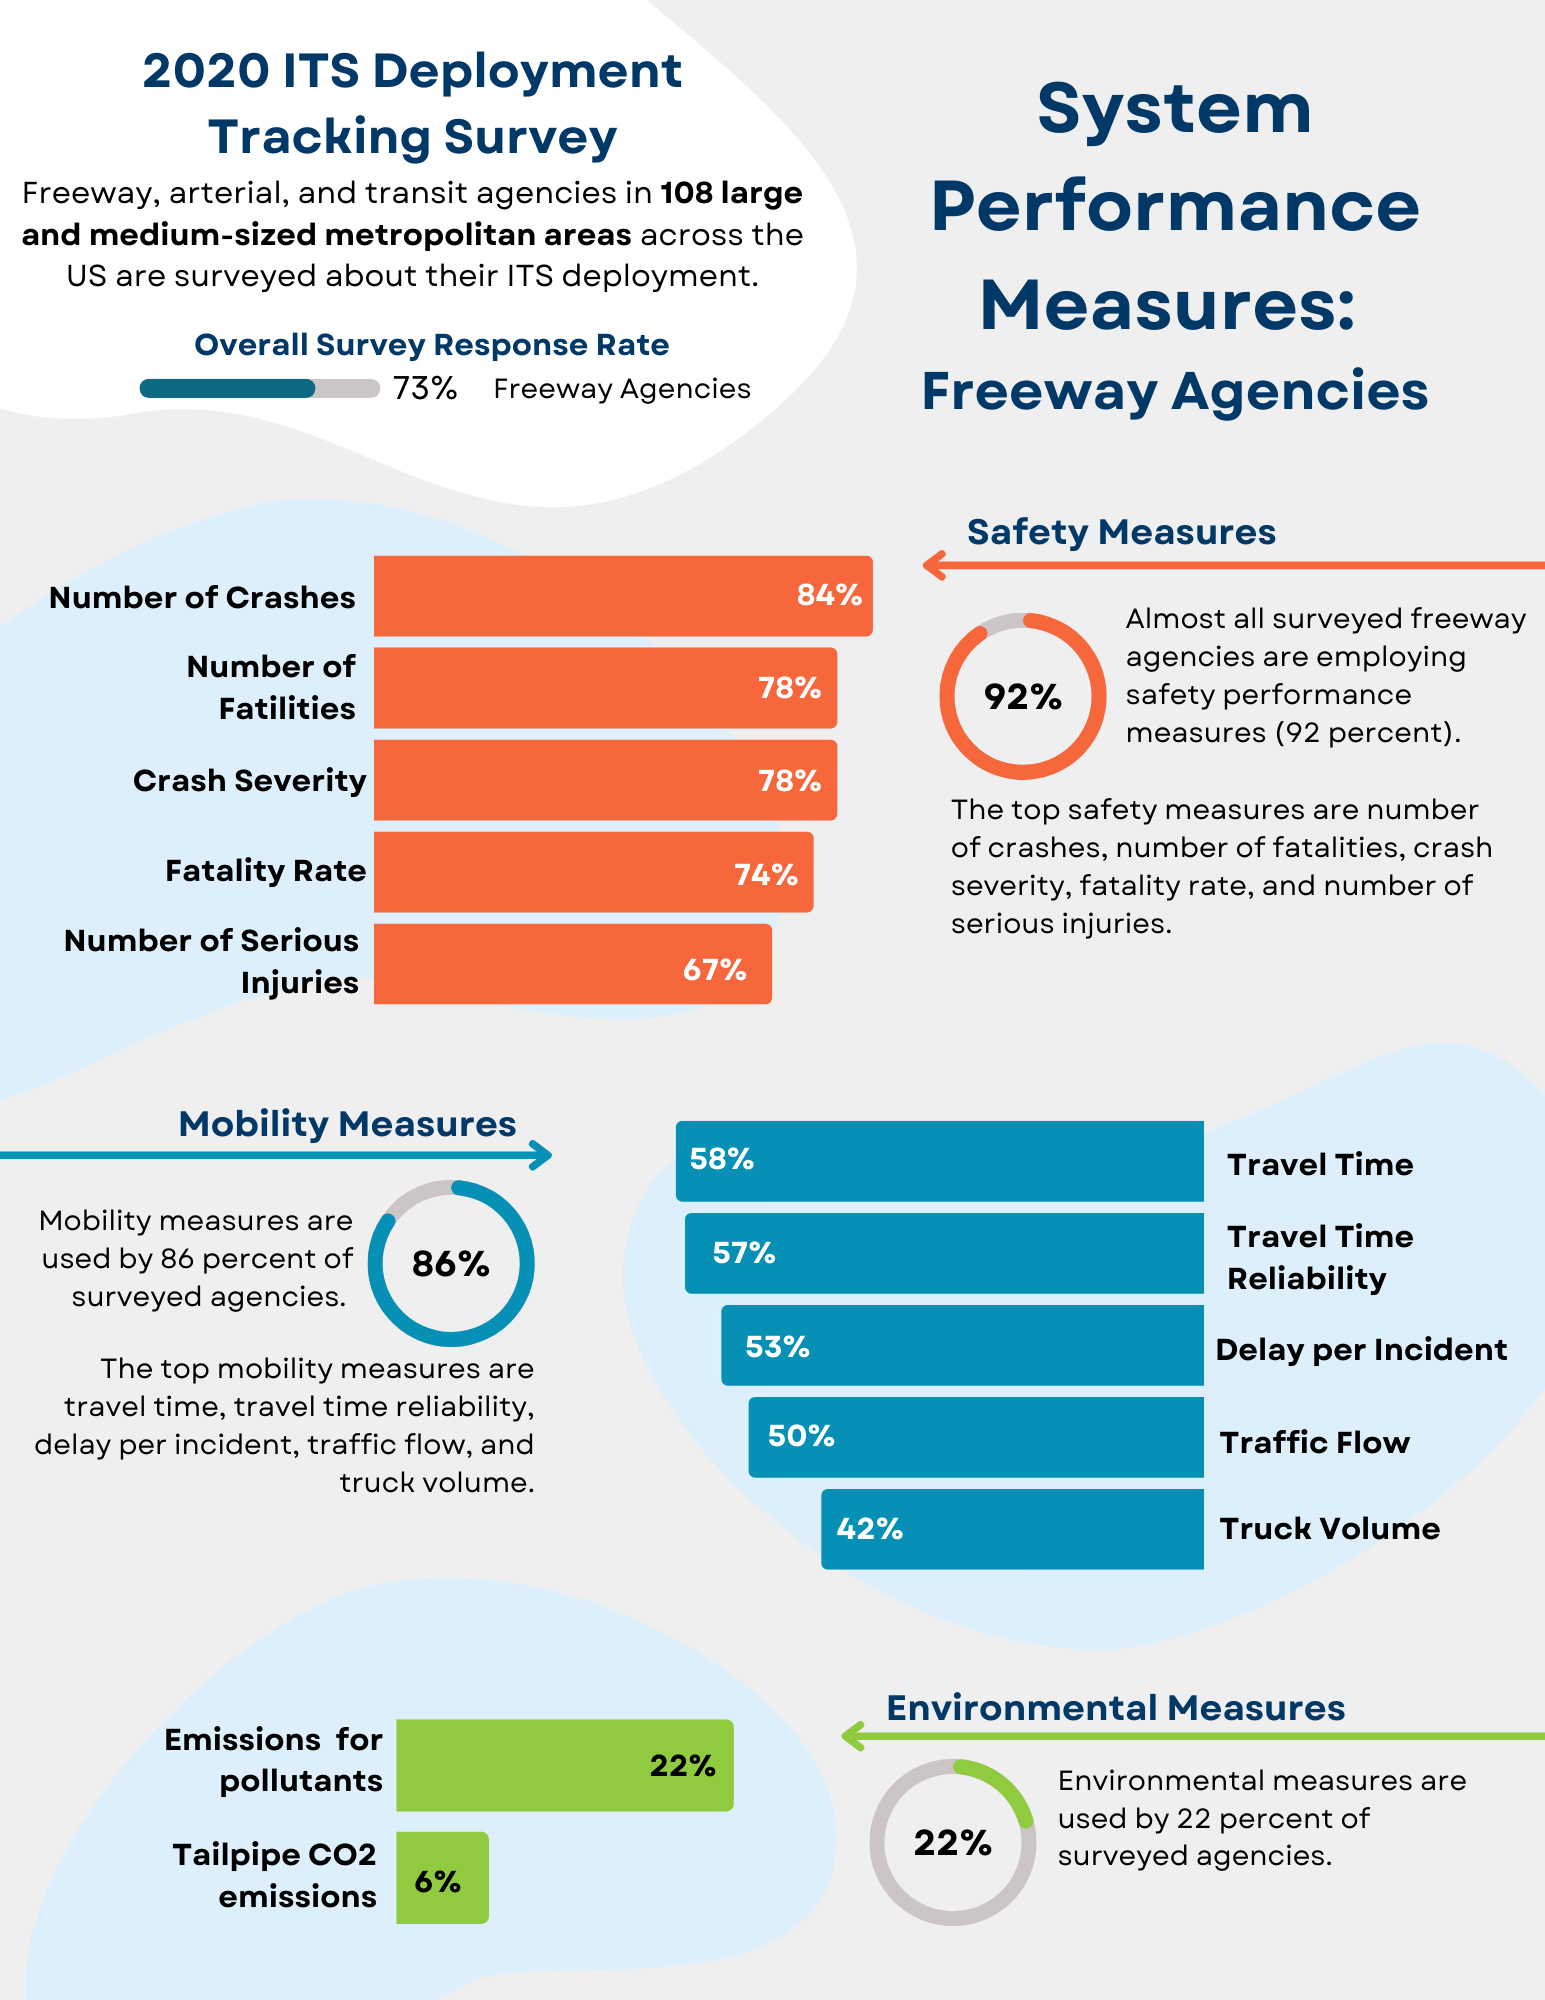 Insights from the 2020 DTS on System Performance Measures for Freeway Agencies, including that the top safety measures are number of crashes, number of fatalities, crash severity, fatality rate, and number of serious injuries, and that the top mobility measures are travel time, travel time reliability, delay per incident, traffic flow, and truck volume.